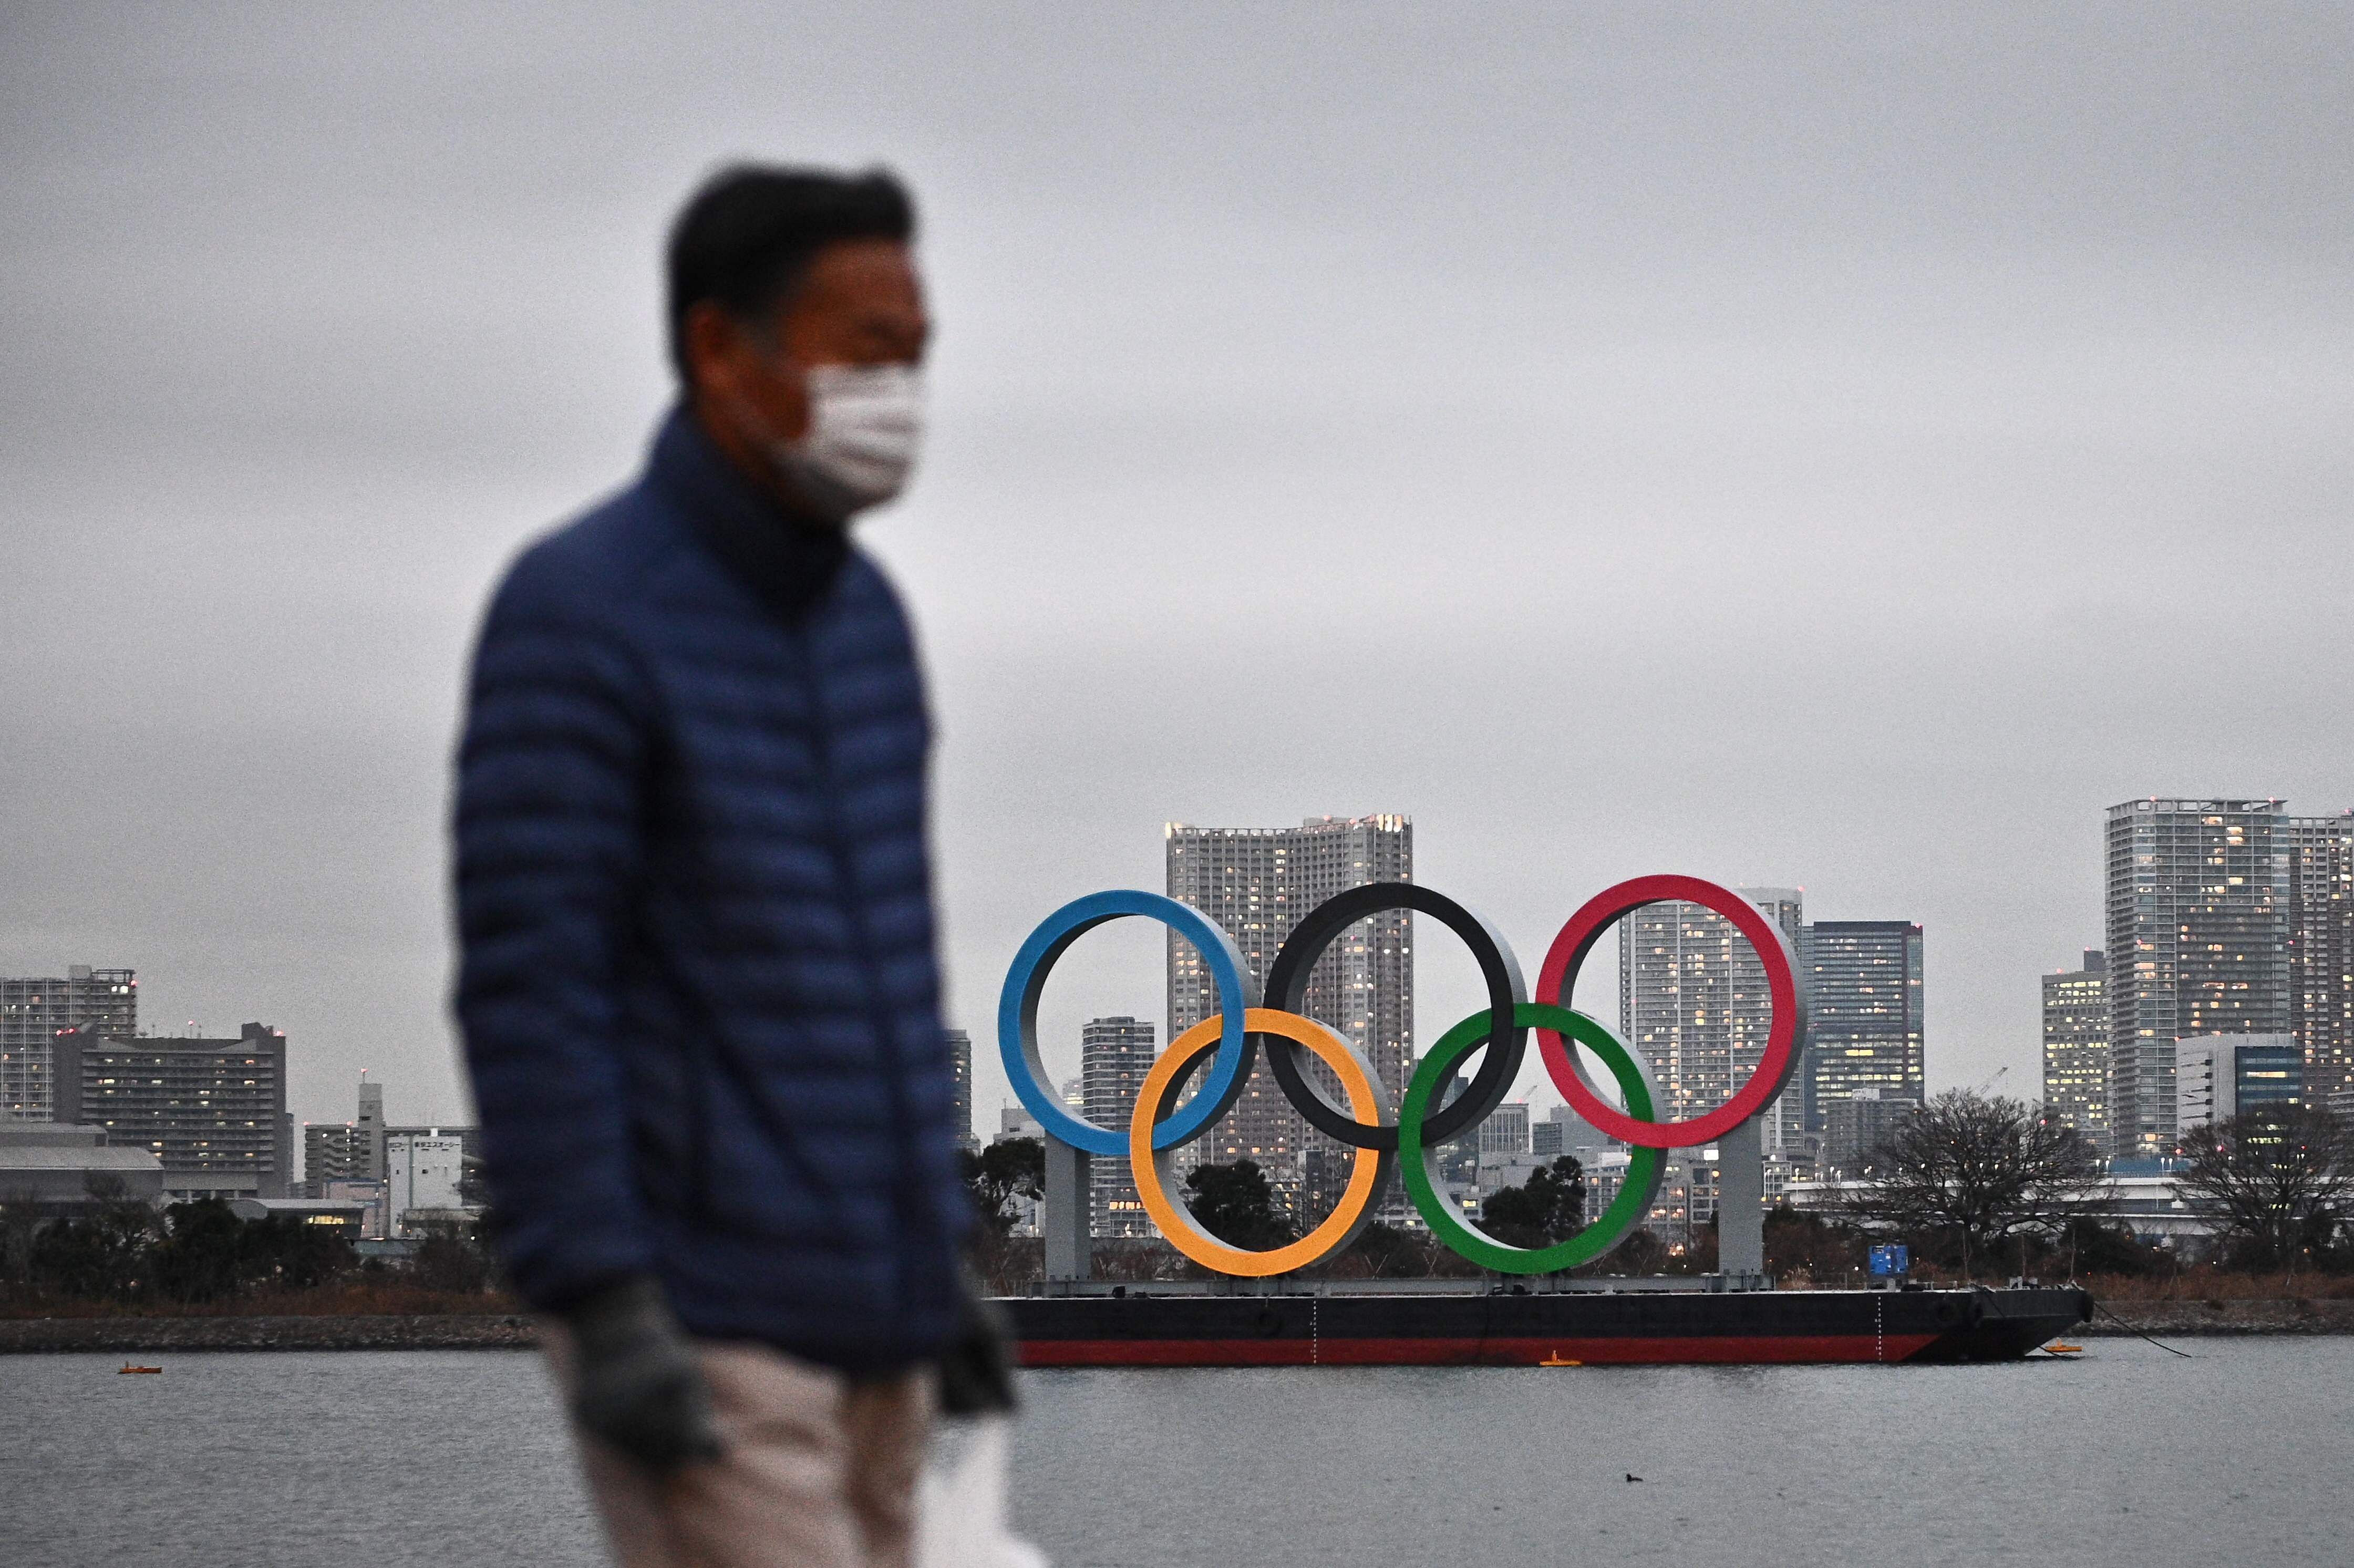 A man walks past the Olympic rings on display at the Odaiba waterfront in Tokyo. Credit: AFP Photo